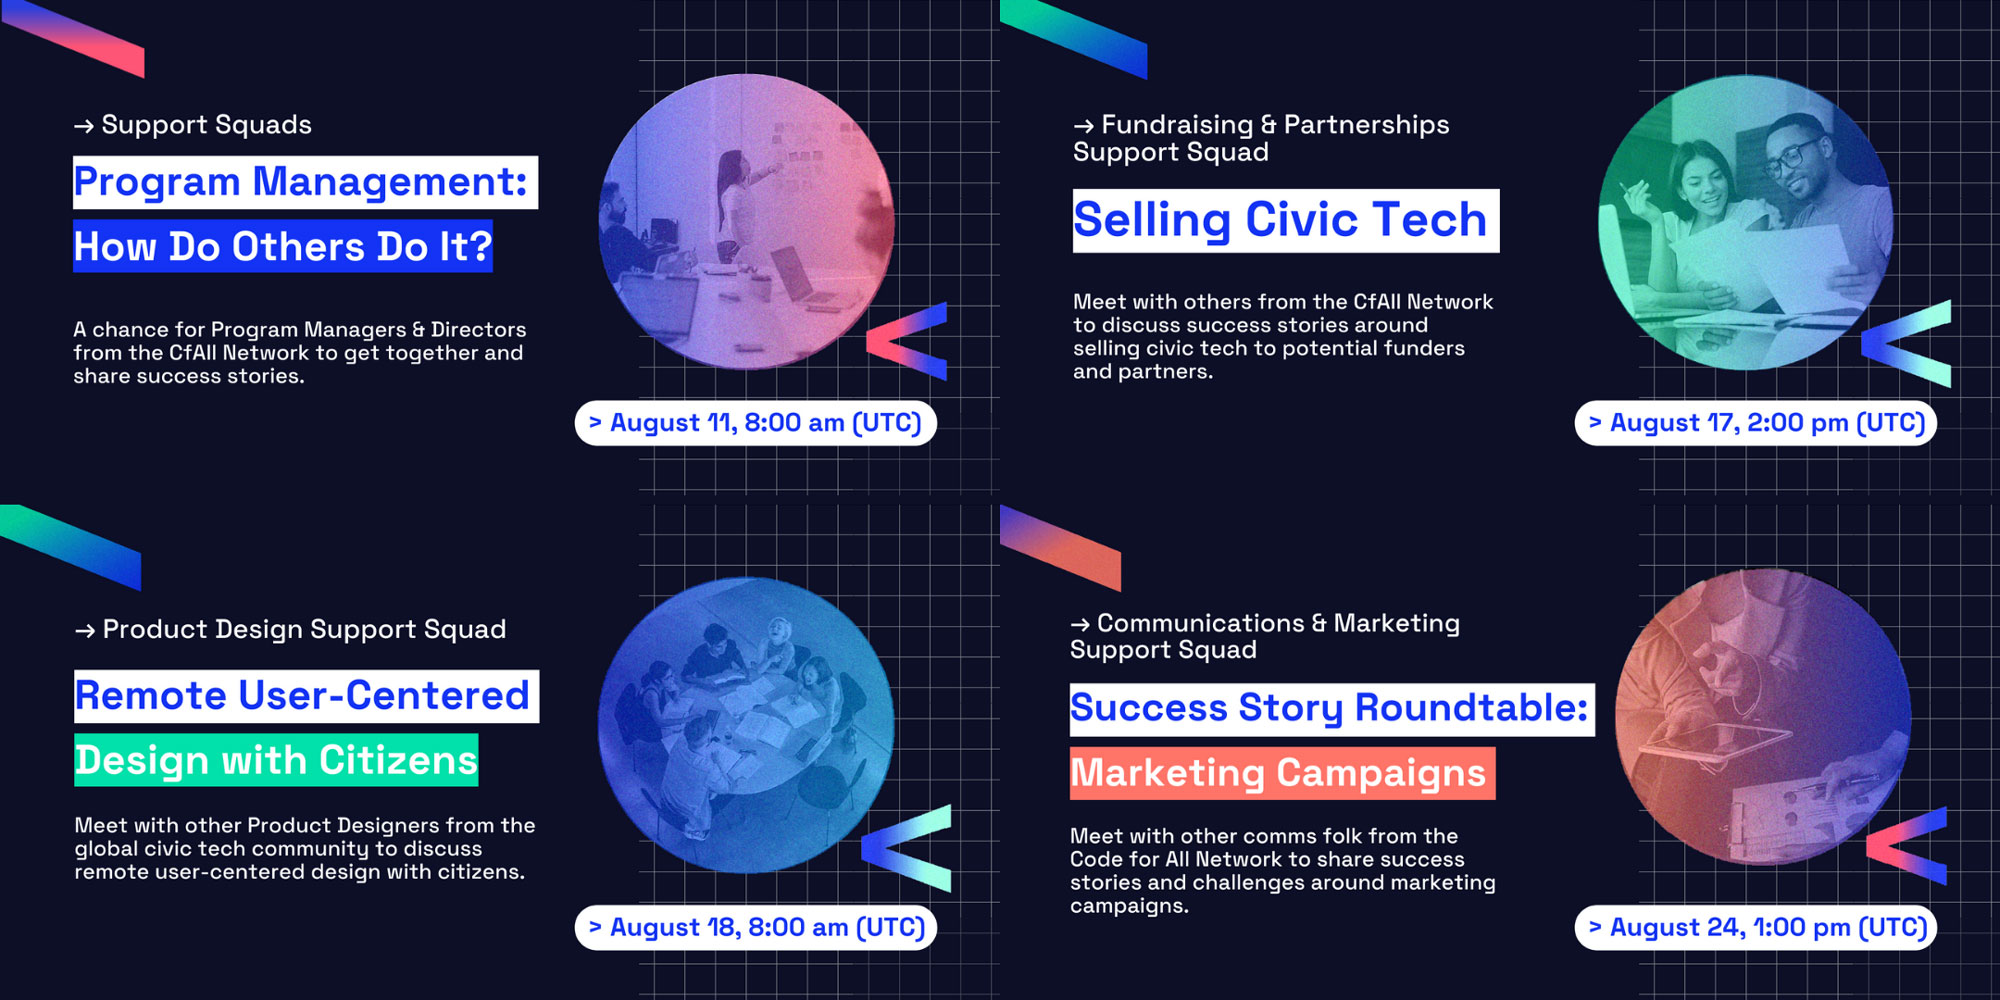 Composite of 4 event posters with the titles: 1 - Program Management: How Do Others Do It? 2 - Selling Civic Tech. 3 - Success Story Roundtable: Marketing Campaigns. 4 - Remote User-Centered Design with Citizens.